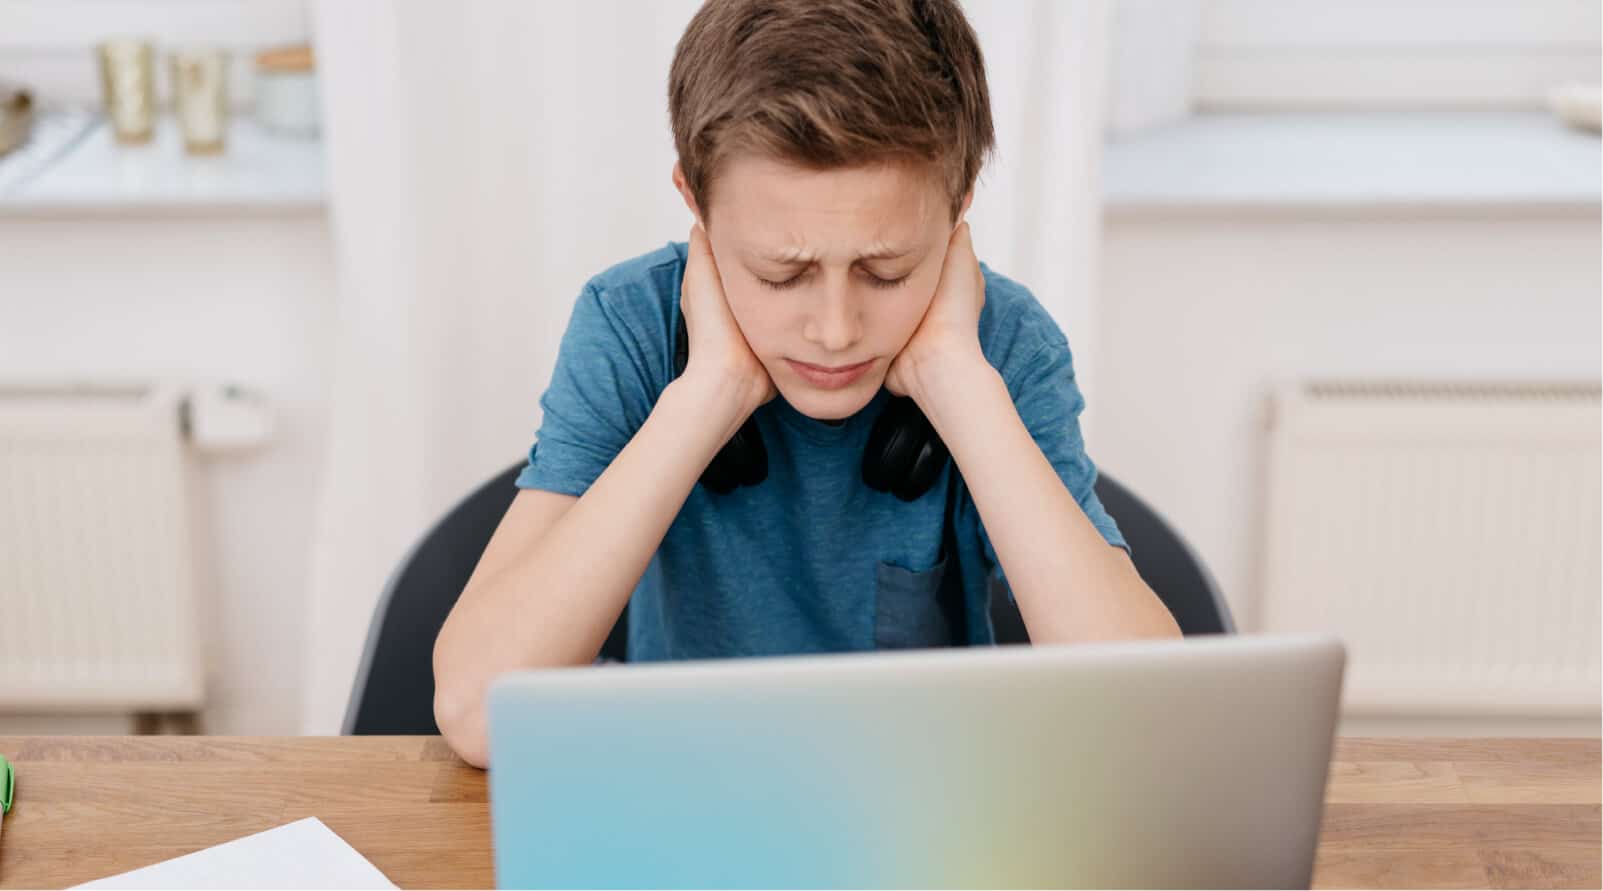 A preteen male child sitting and looking at a laptop, with his hands on the sides of his neck, looking confused or frustrated